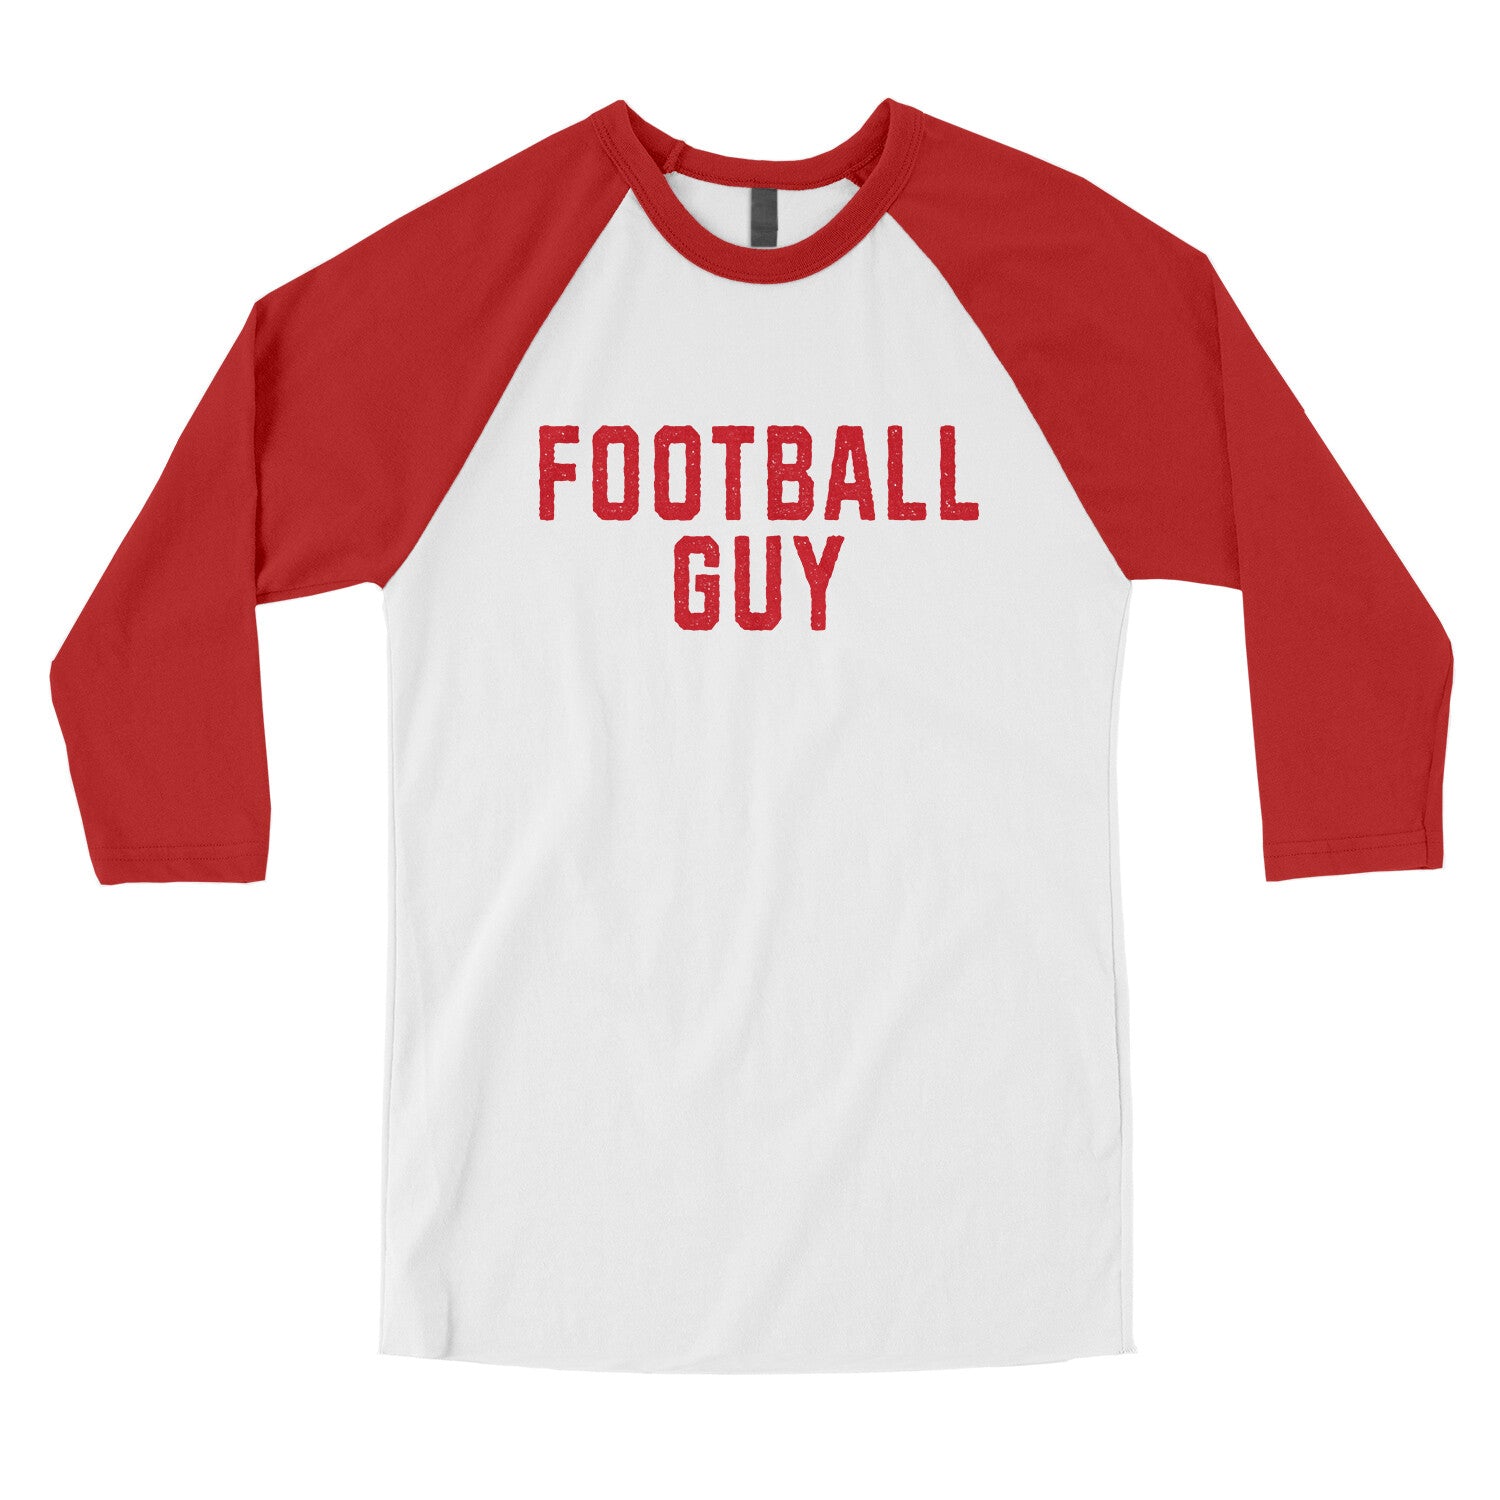 Football Guy in White with Red Color